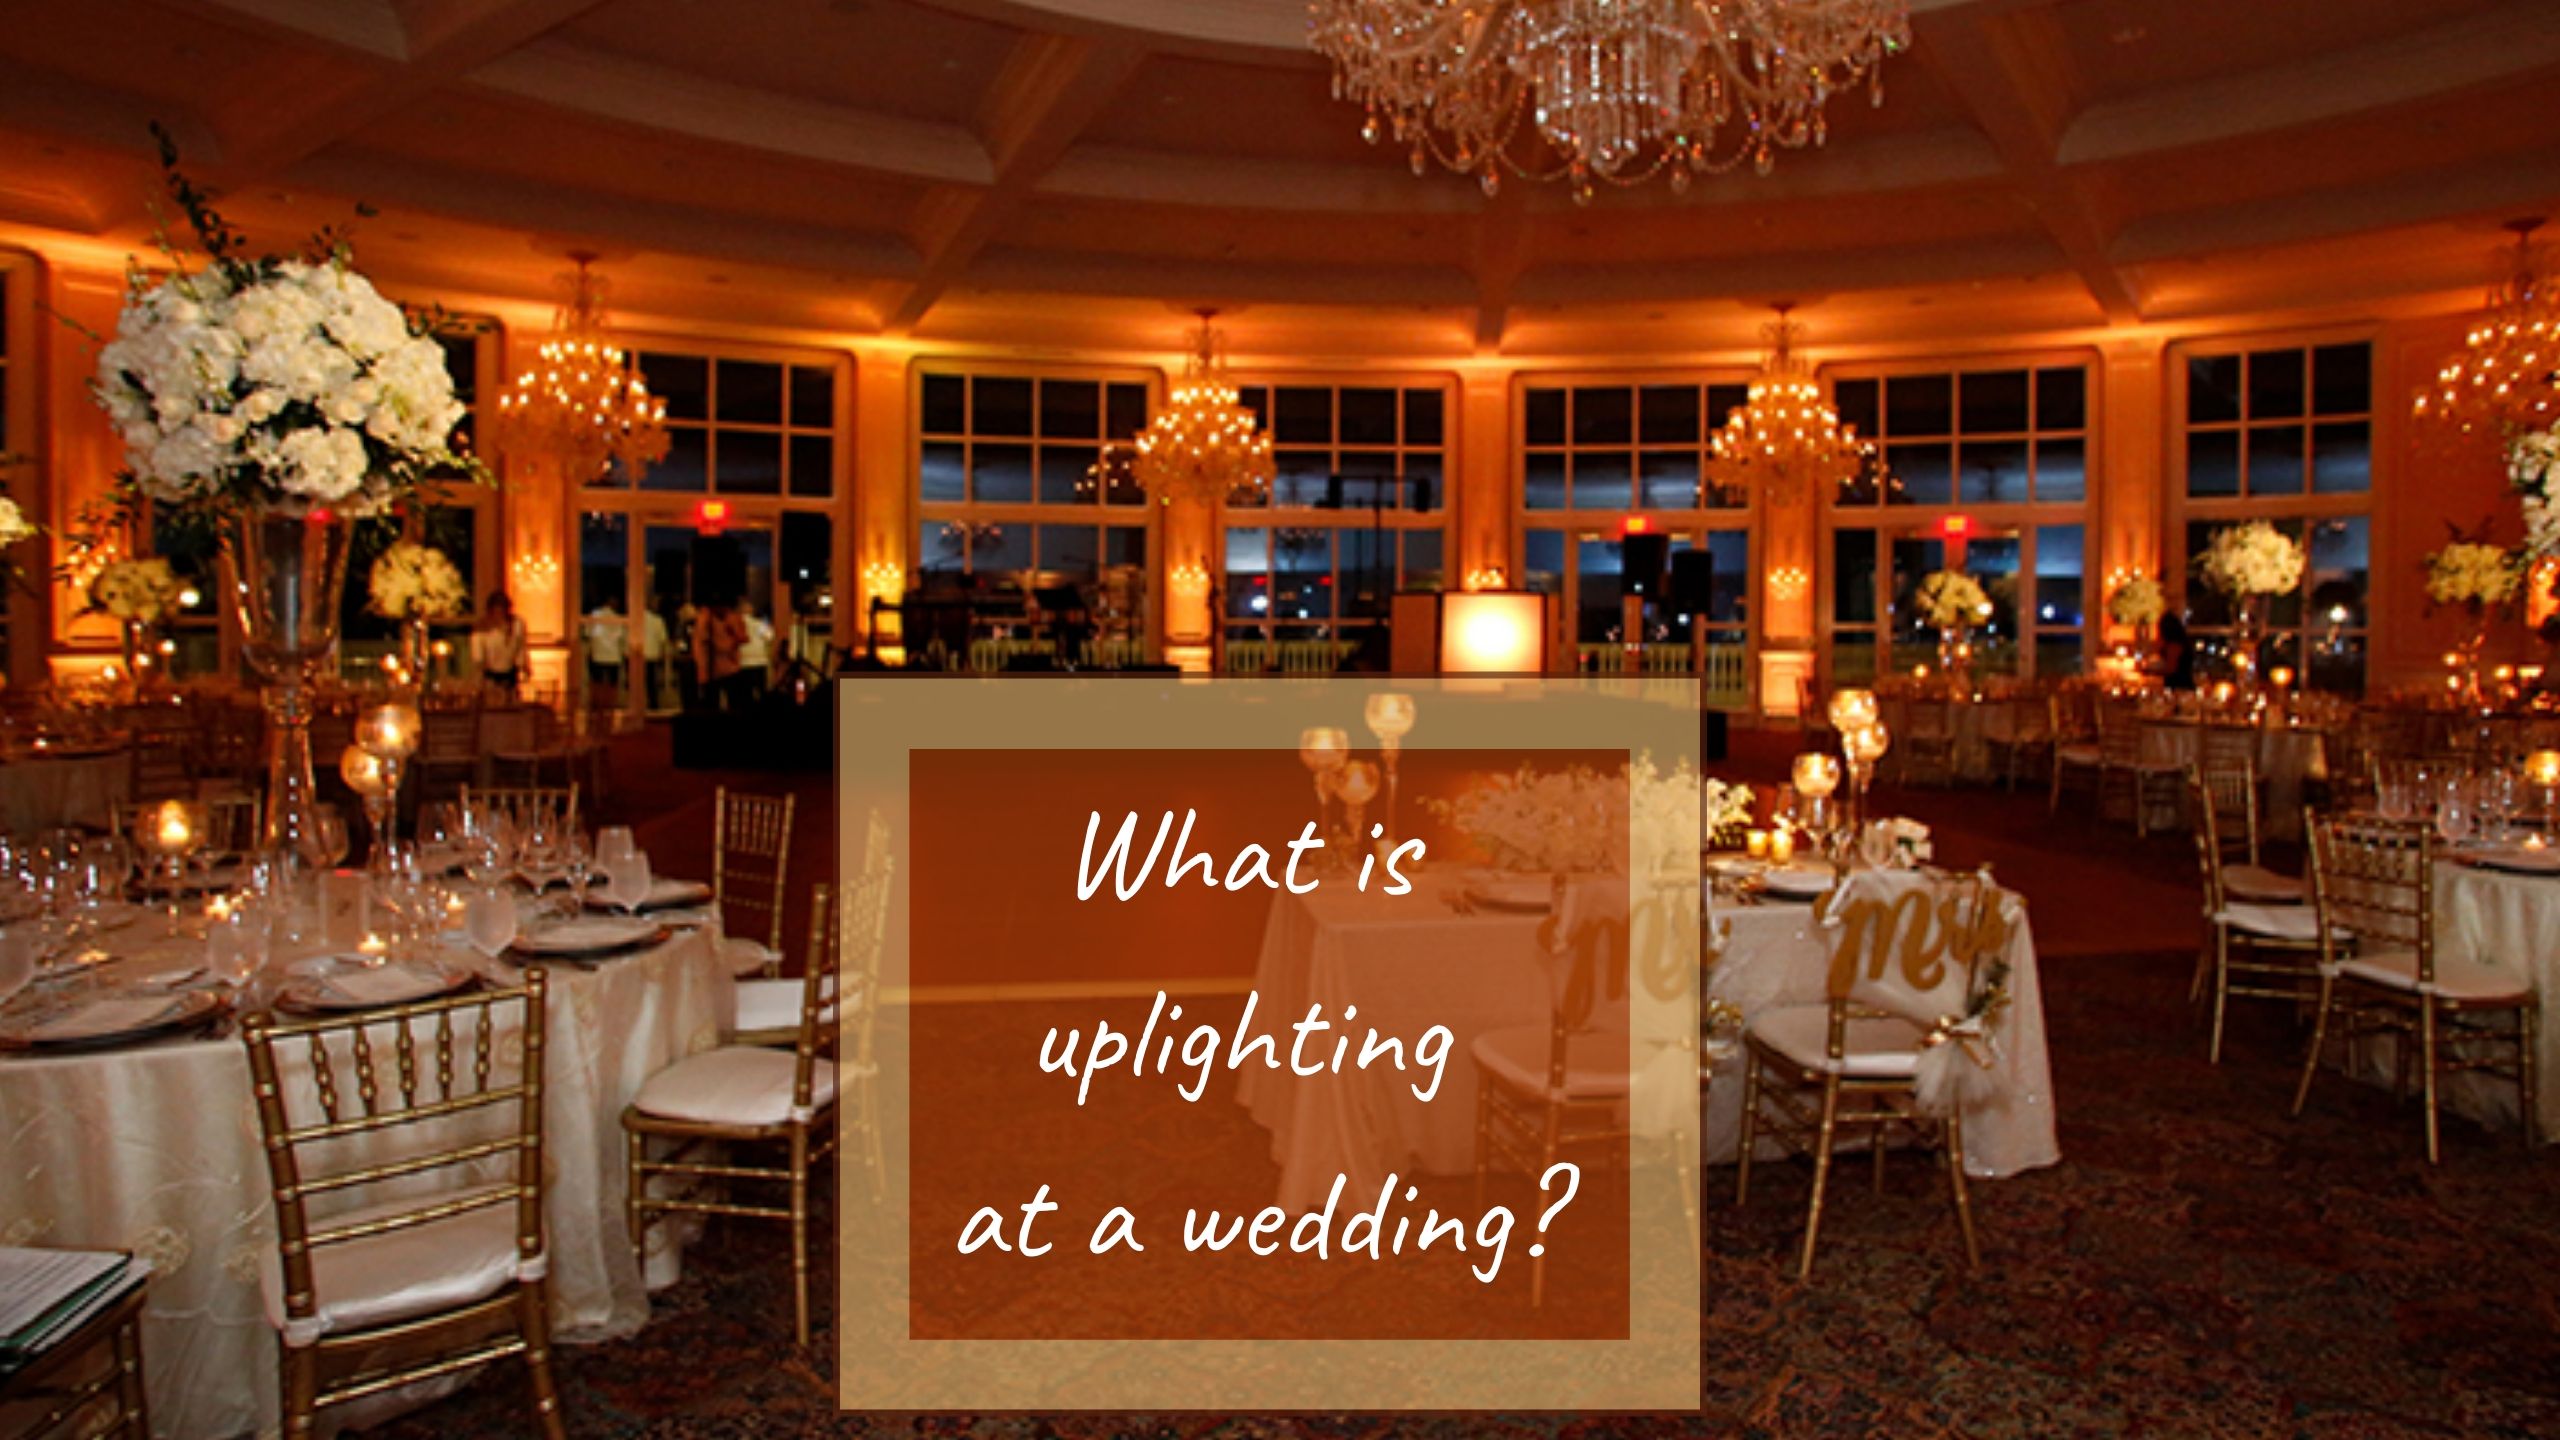 What is uplighting at a wedding?